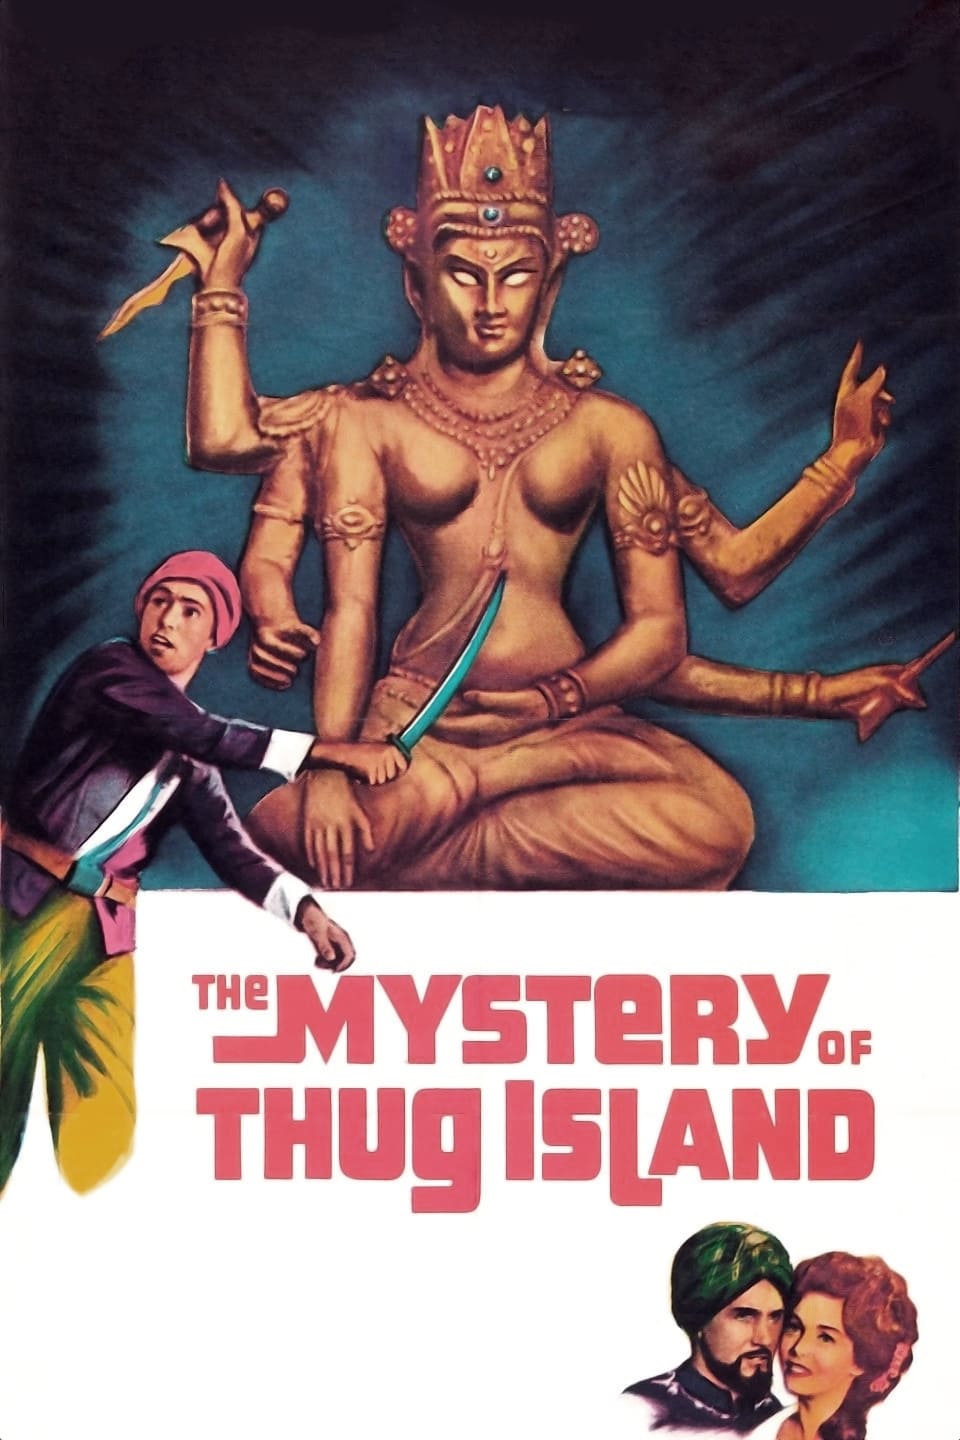 Kidnapped to Mystery Island (1964)